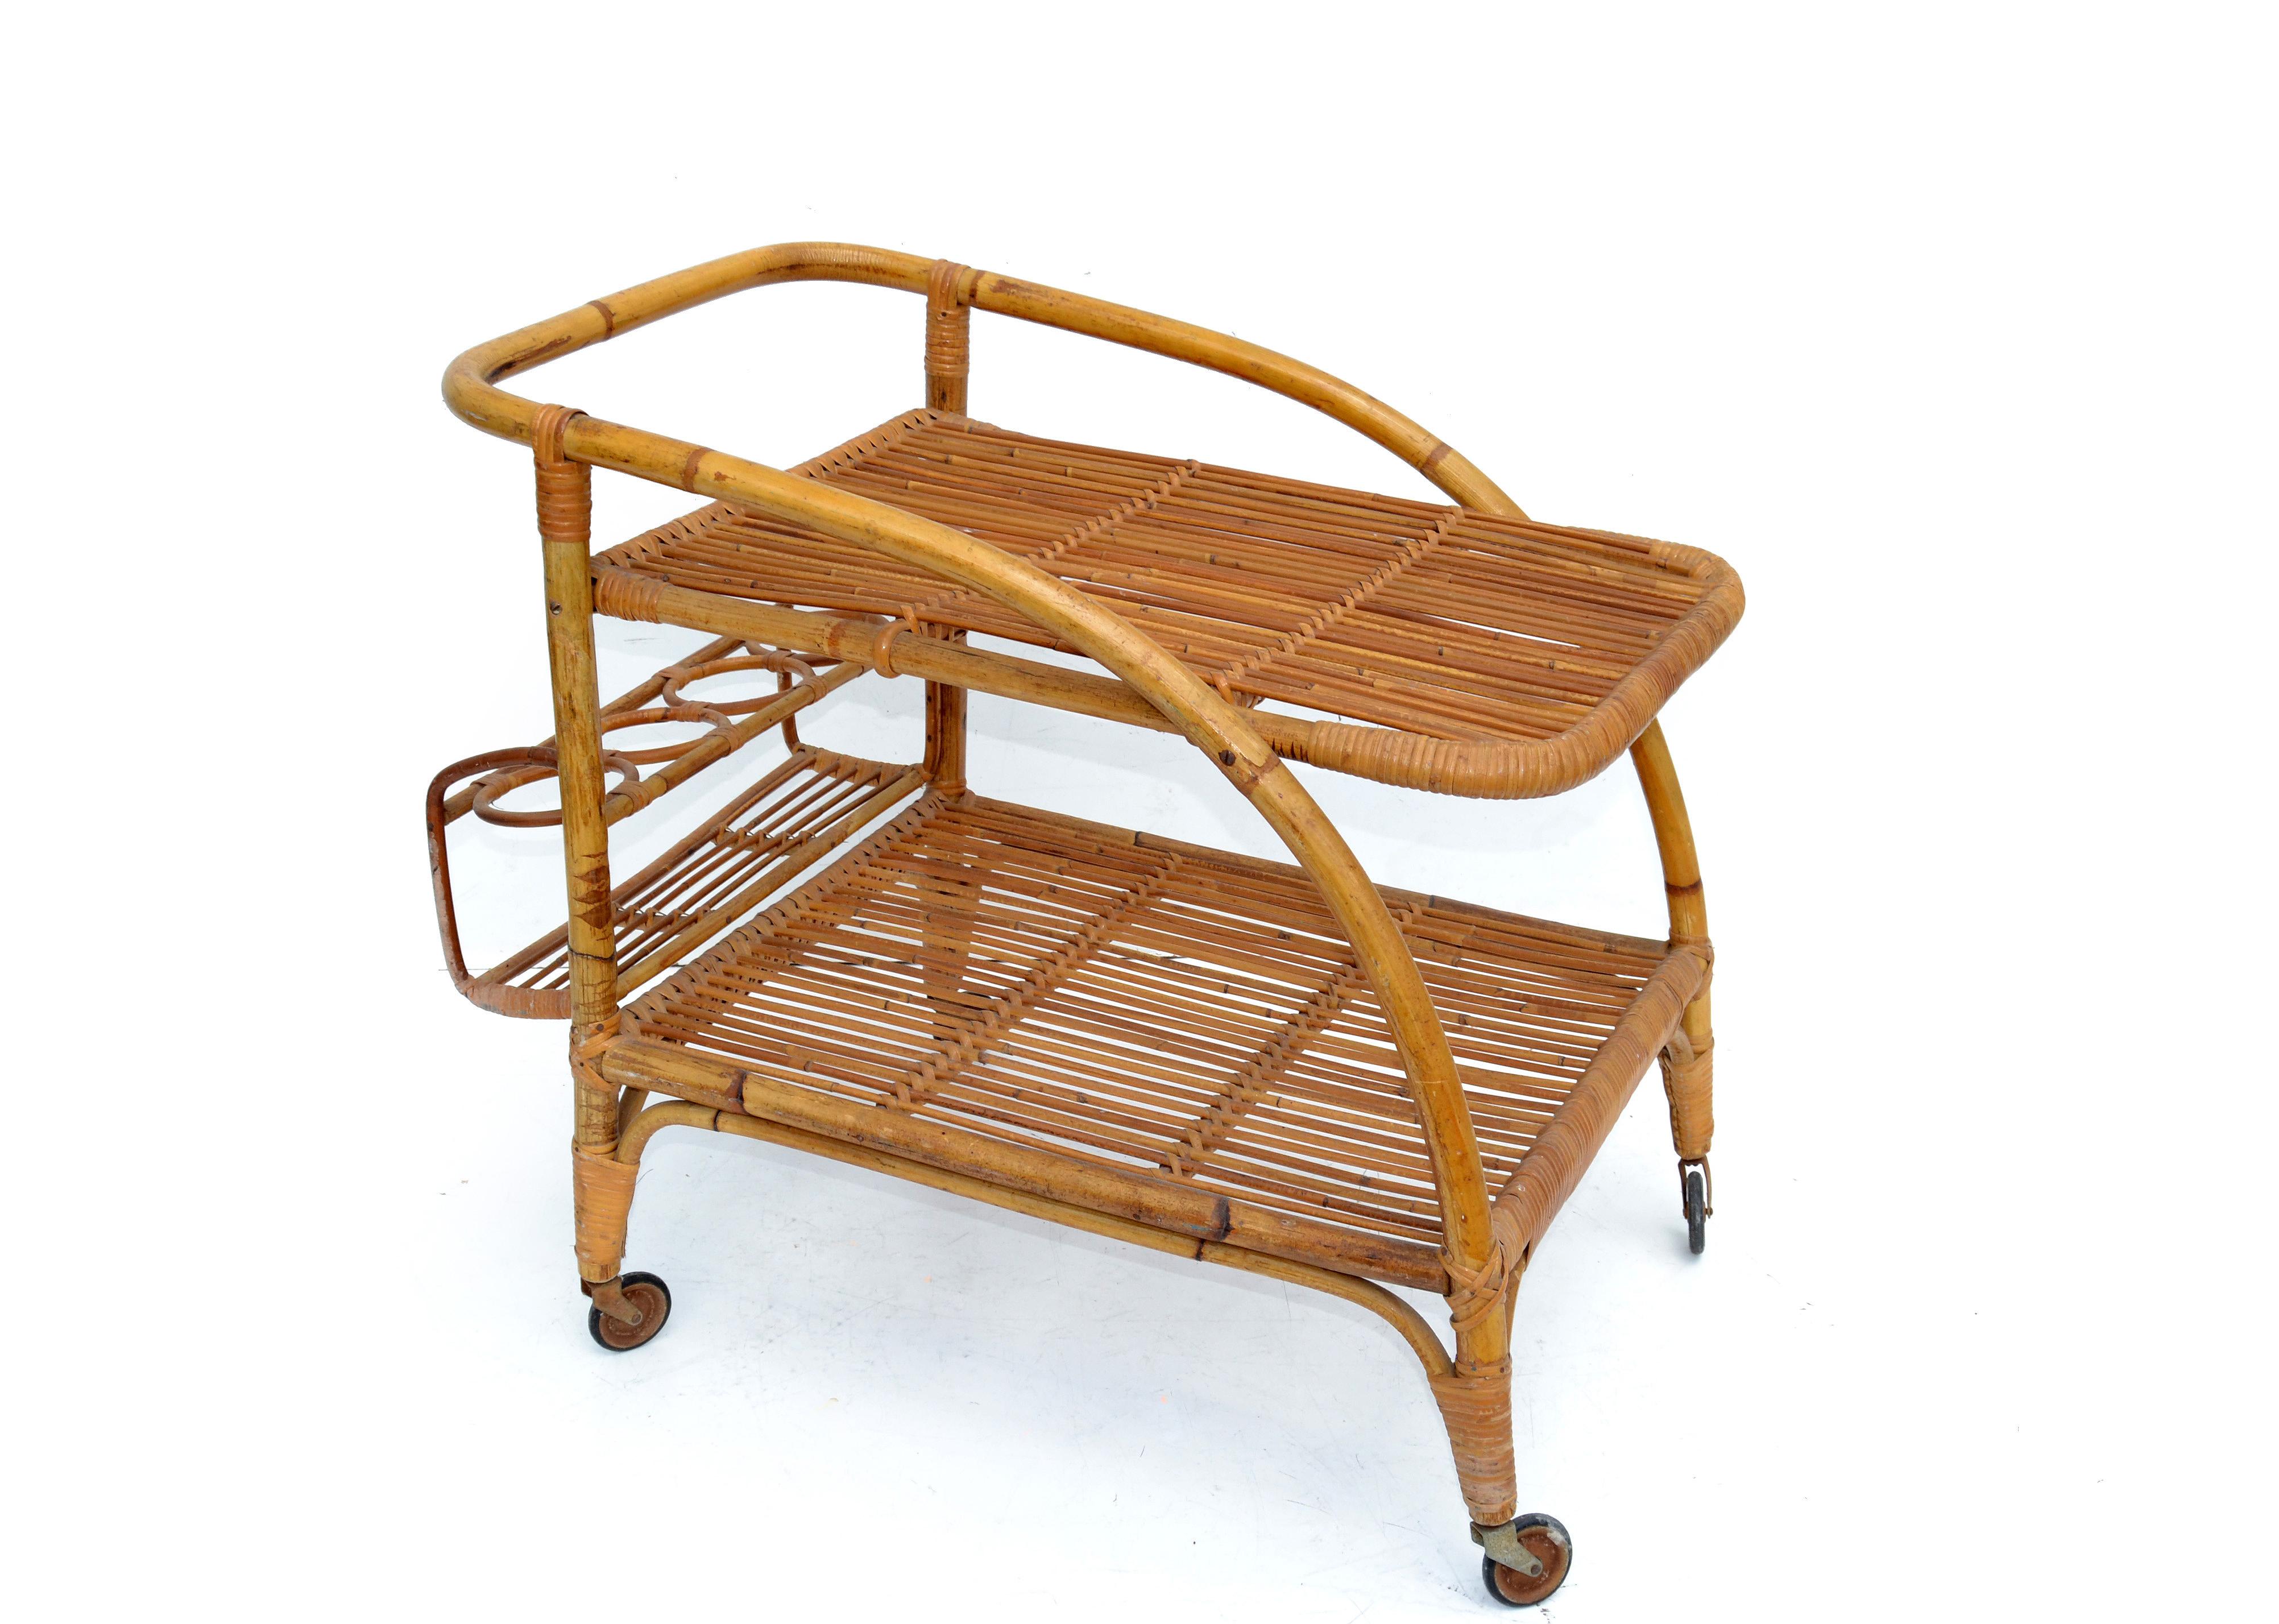 Vintage 1960 2 tiers French bamboo and rattan bar cart.
Space in between 11 inches.